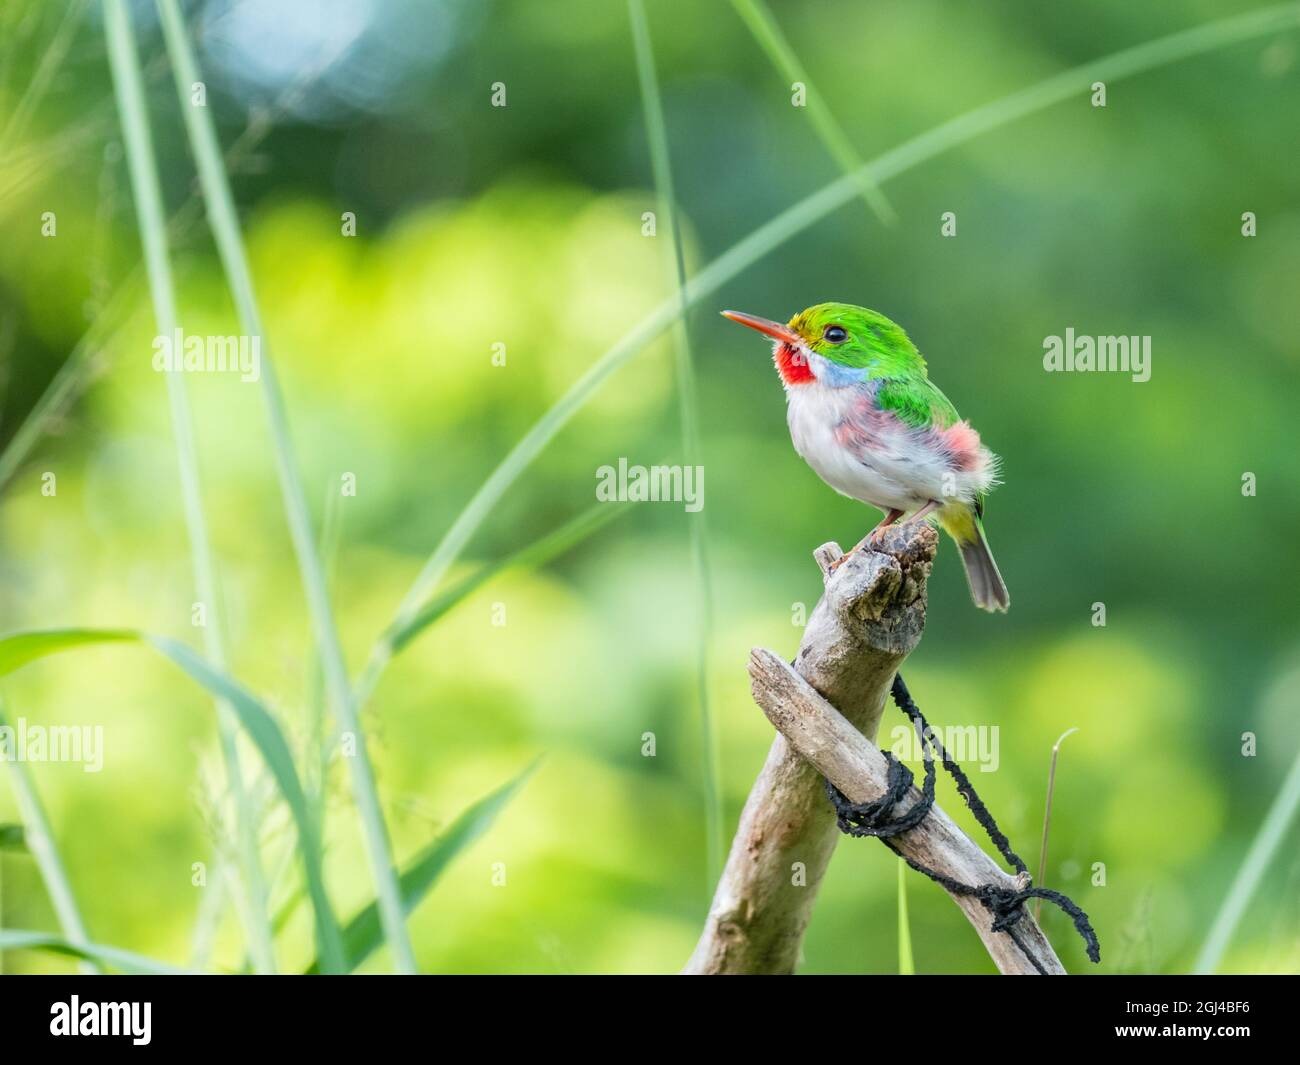 Small Cuban tody perched on a branch Stock Photo